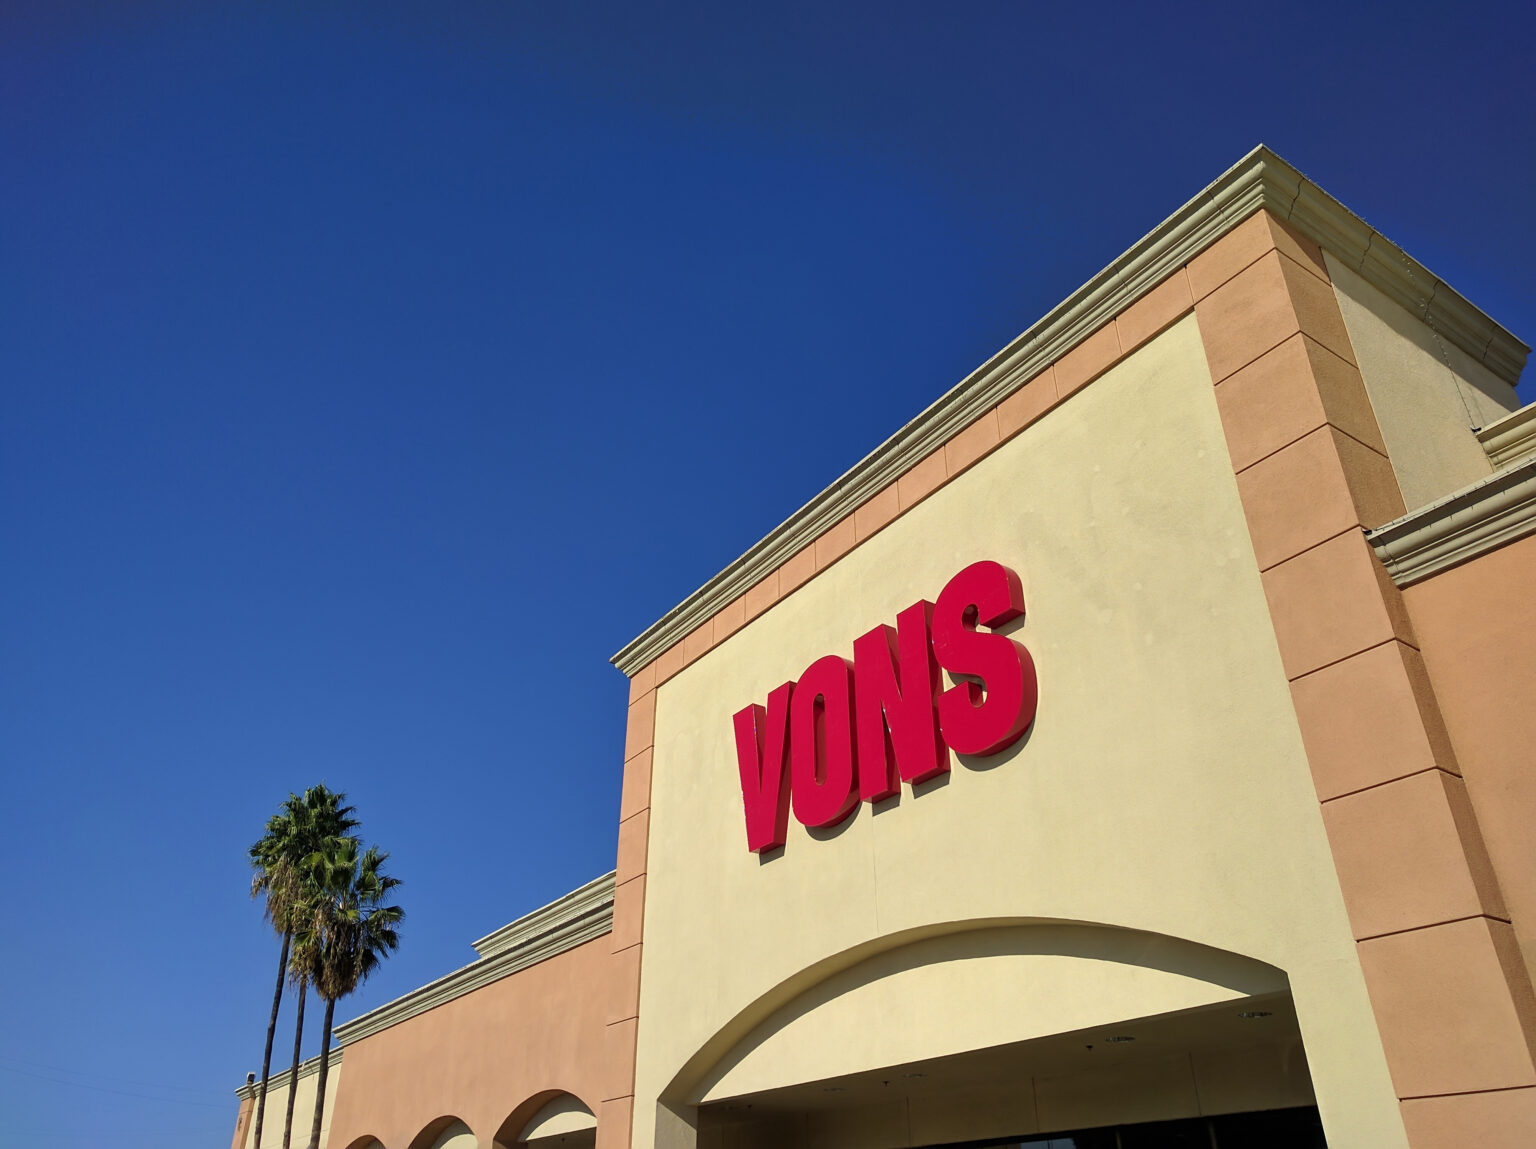 Exterior of a Vons store